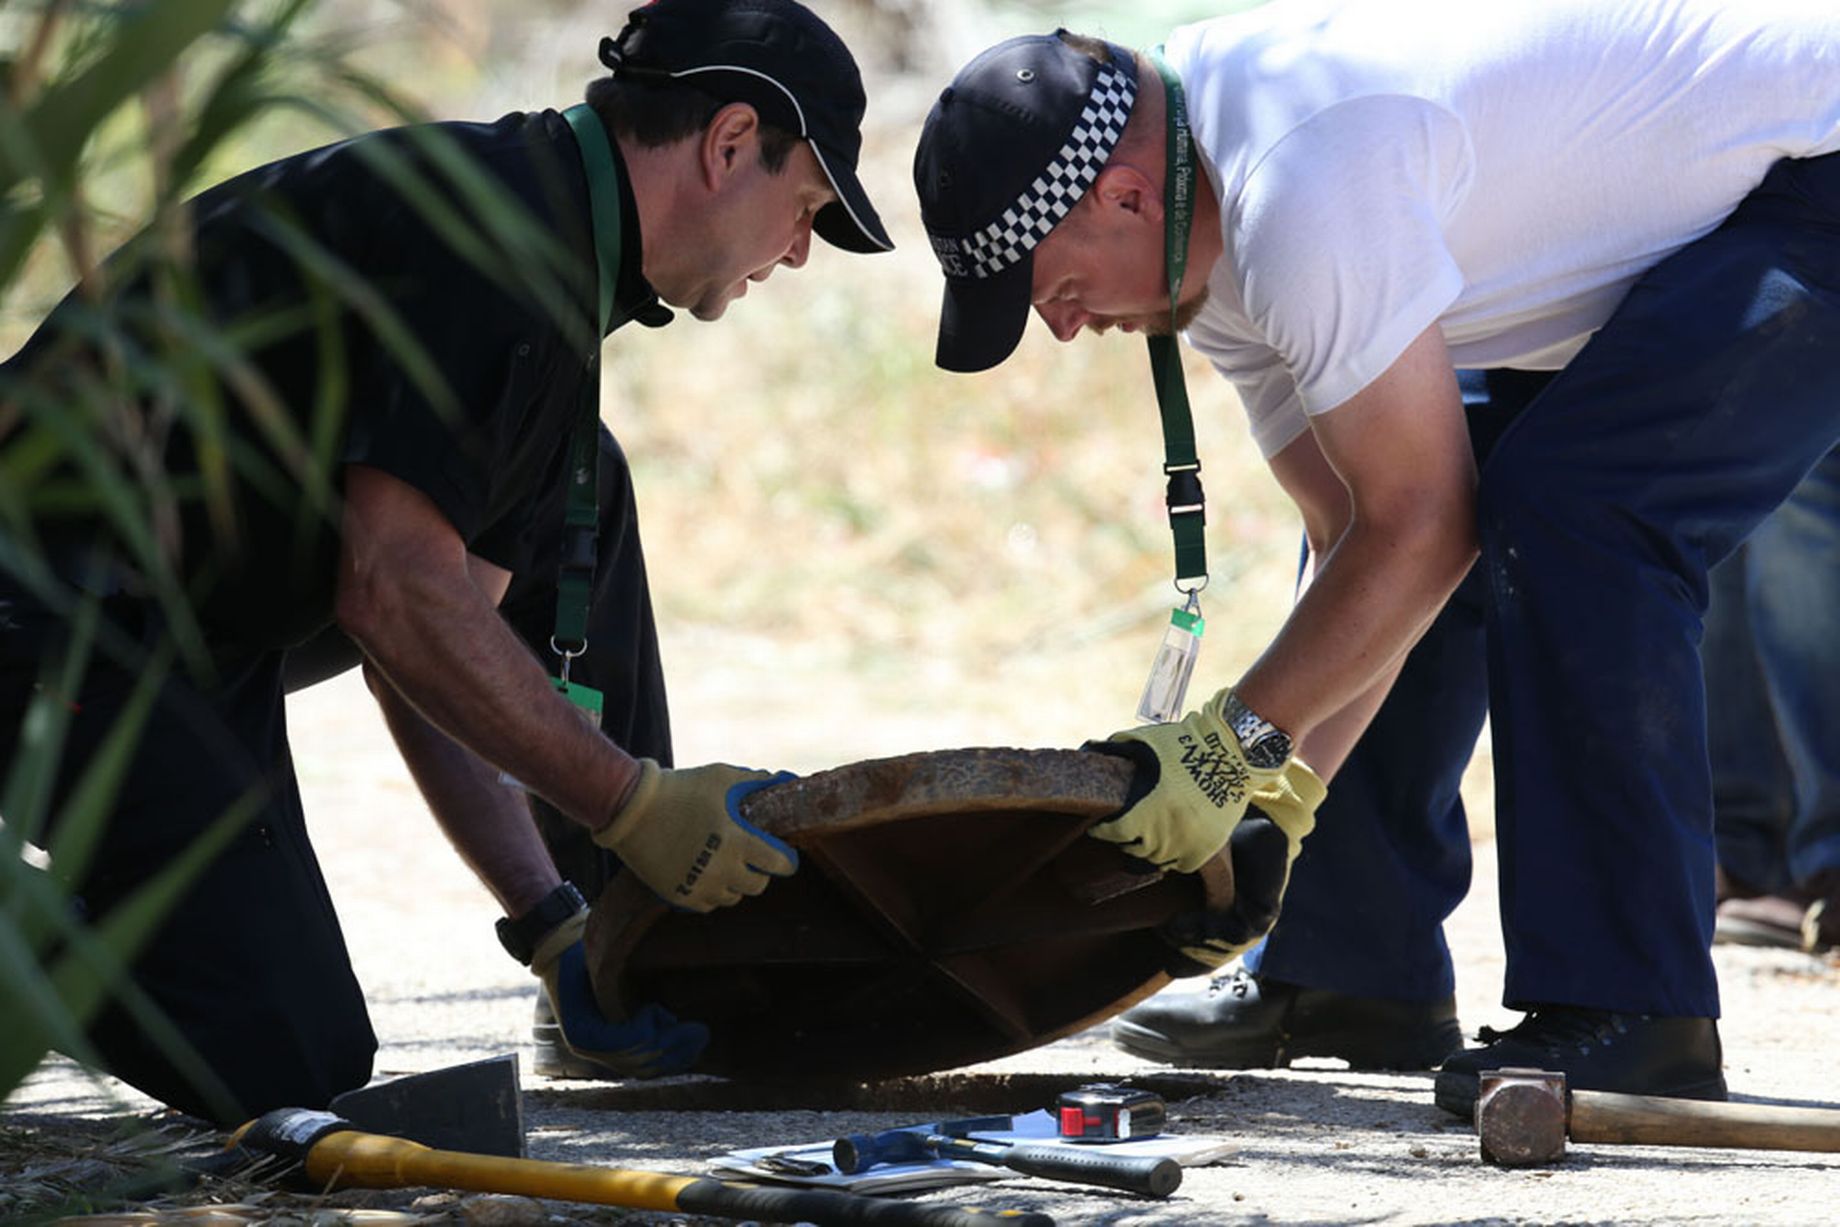 British police use cameras to look down manhole covers as part of new searches in Praia da Luz